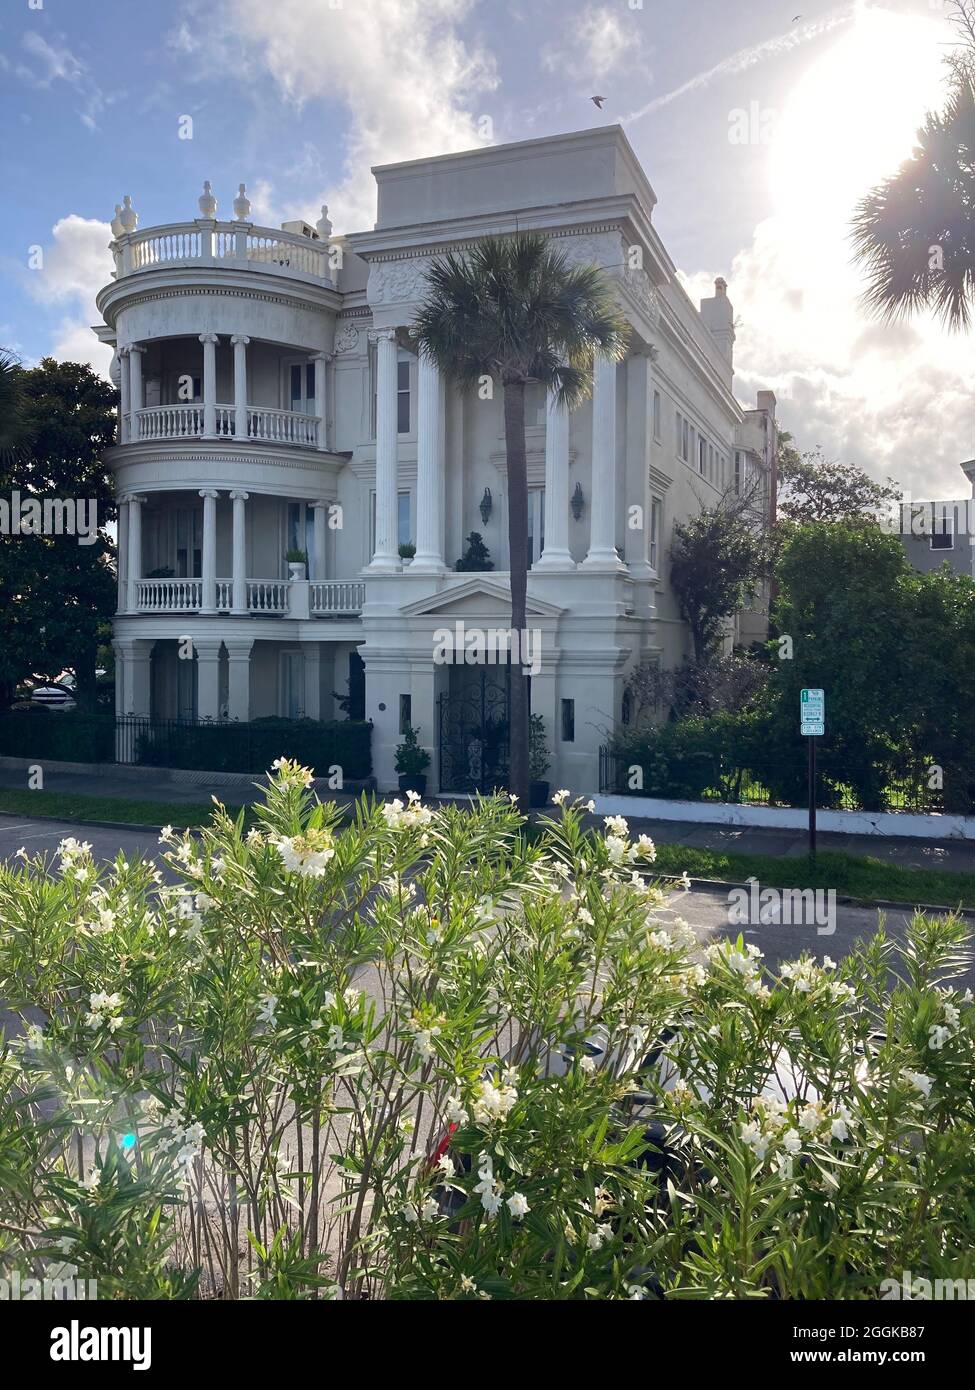 Charleston, South Carolina. 29 East Battery home, a.k.a. Porcher-Simond House, constructed in 1856 in, then popular, Italian Renaissance Revival architecture Stock Photo